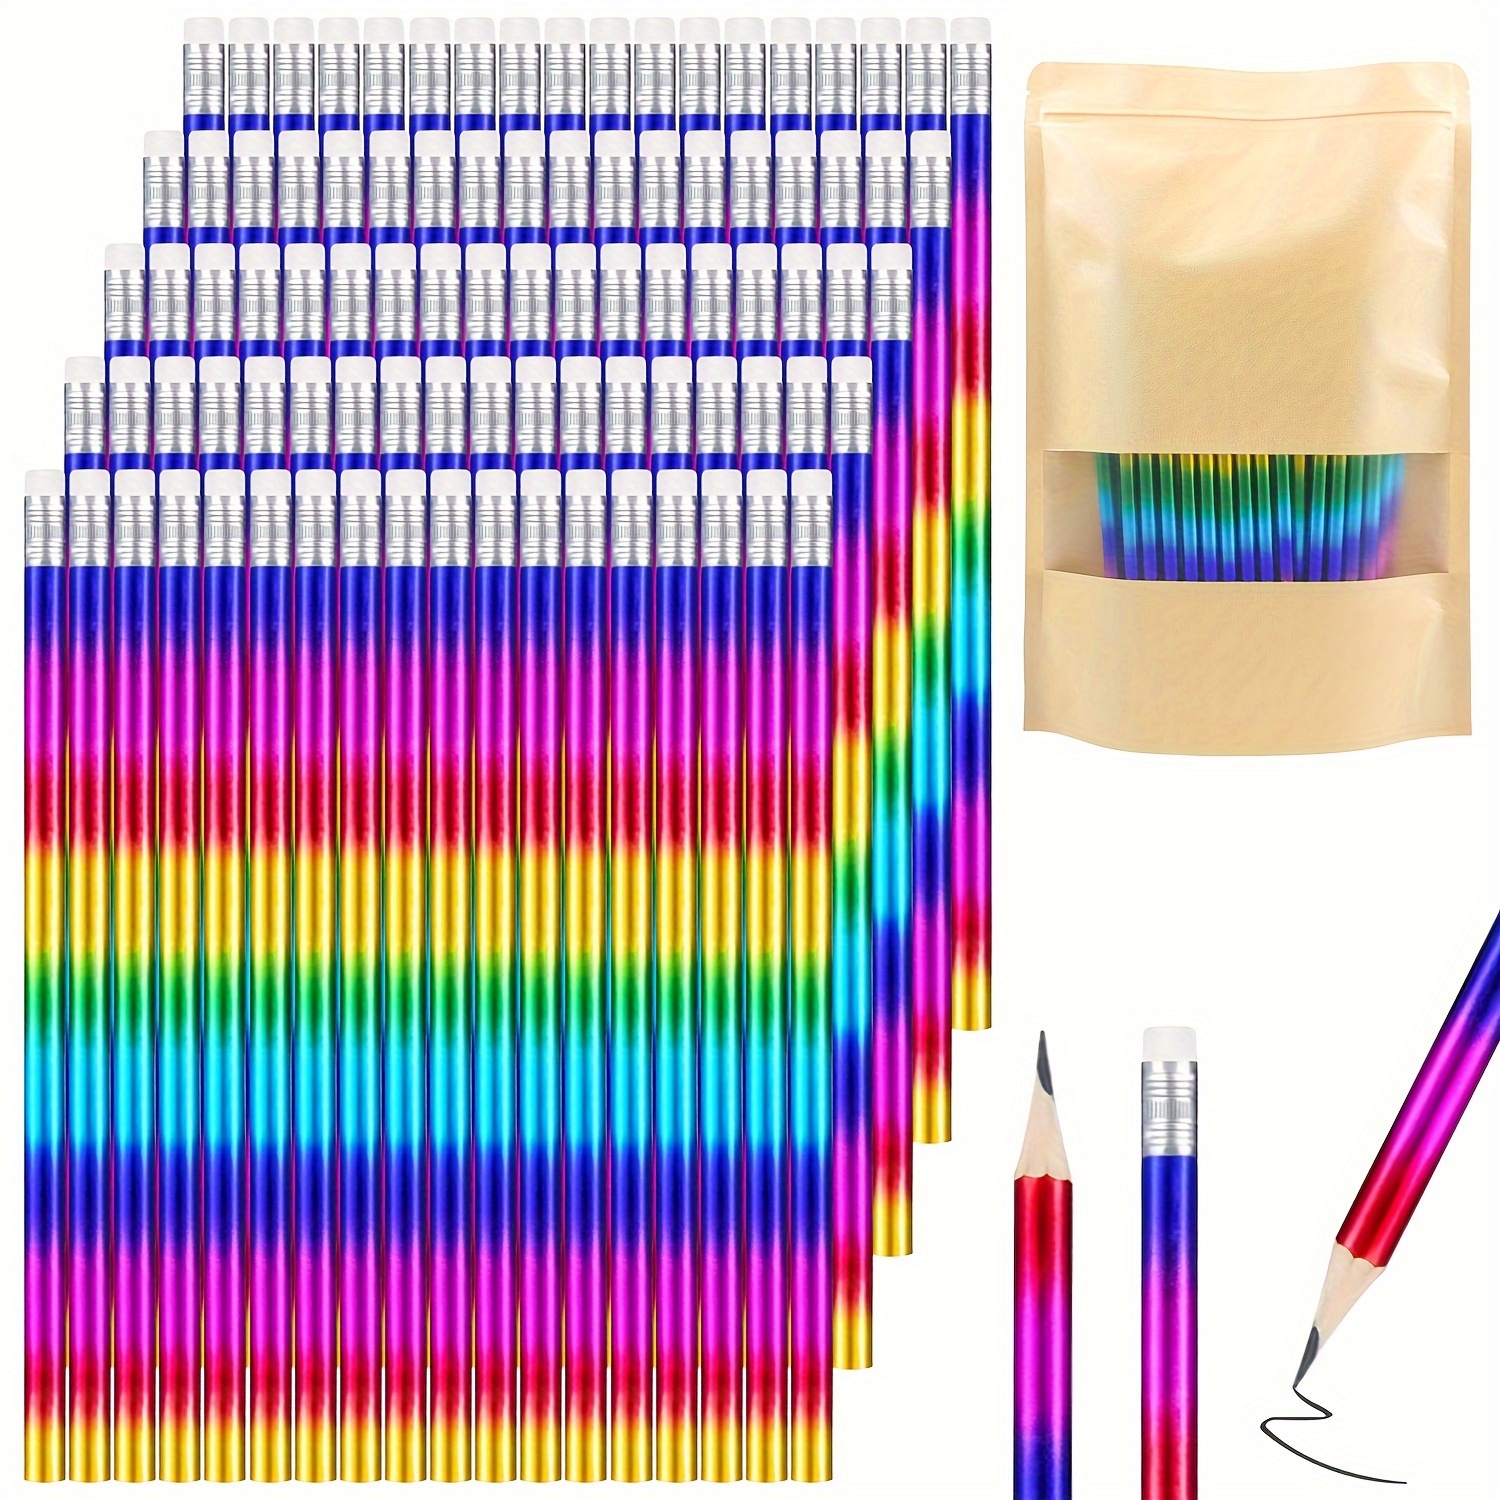 

Ccfoud Rainbow Wooden Pencils (50/100/150 Pack), Hb #2 Medium Point, Erasable, Pre-sharpened For Writing, Drawing, And School Supplies